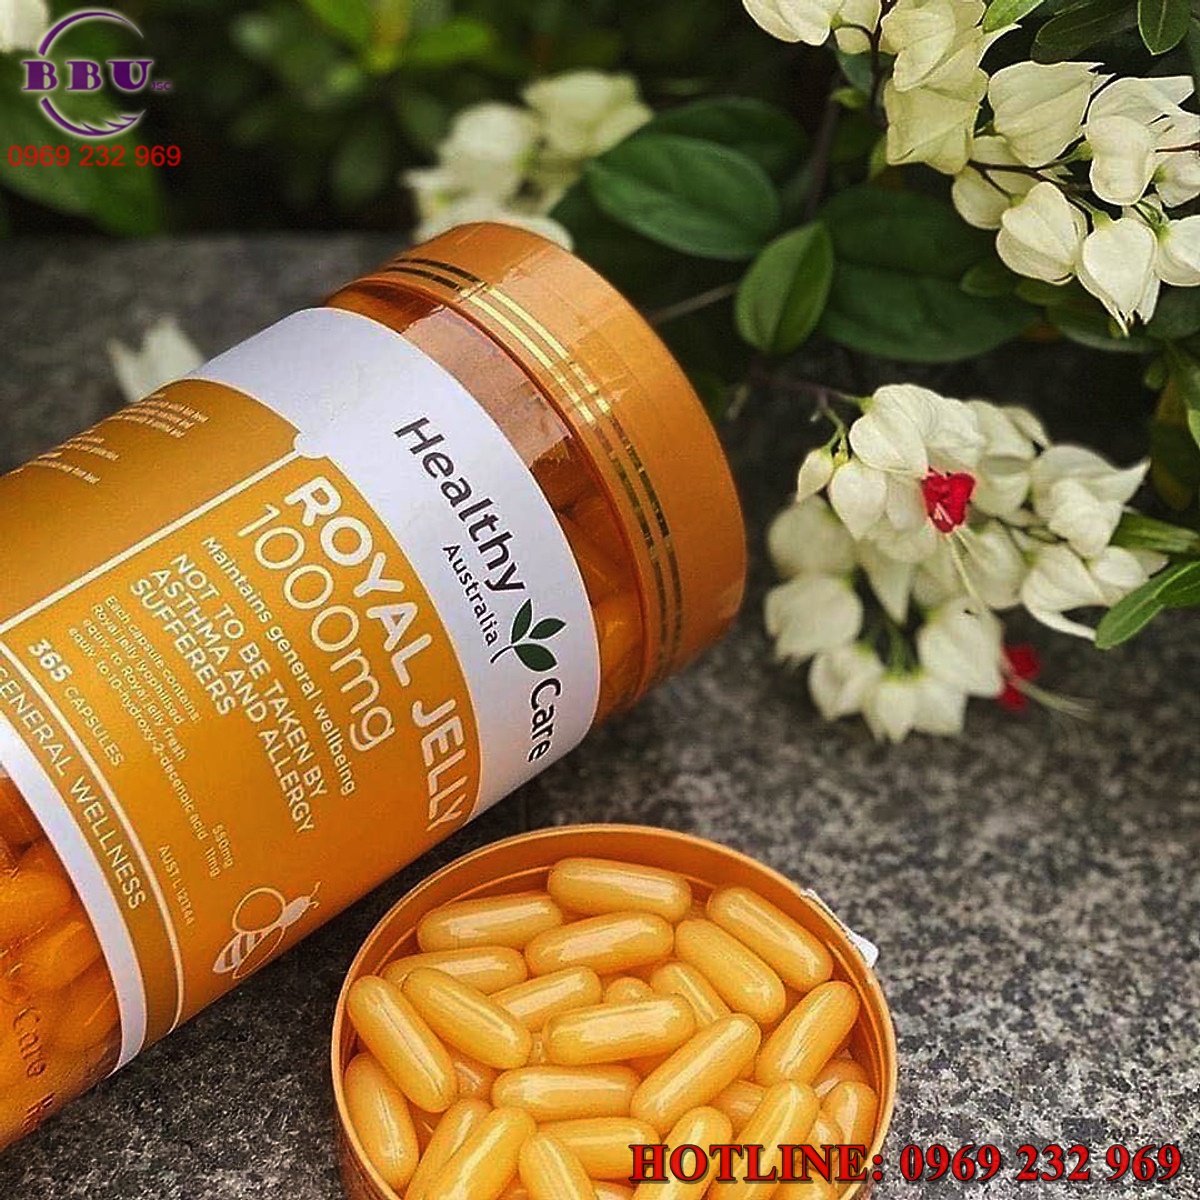 Sữa Ong Chúa Healthy Care Royal Jelly 